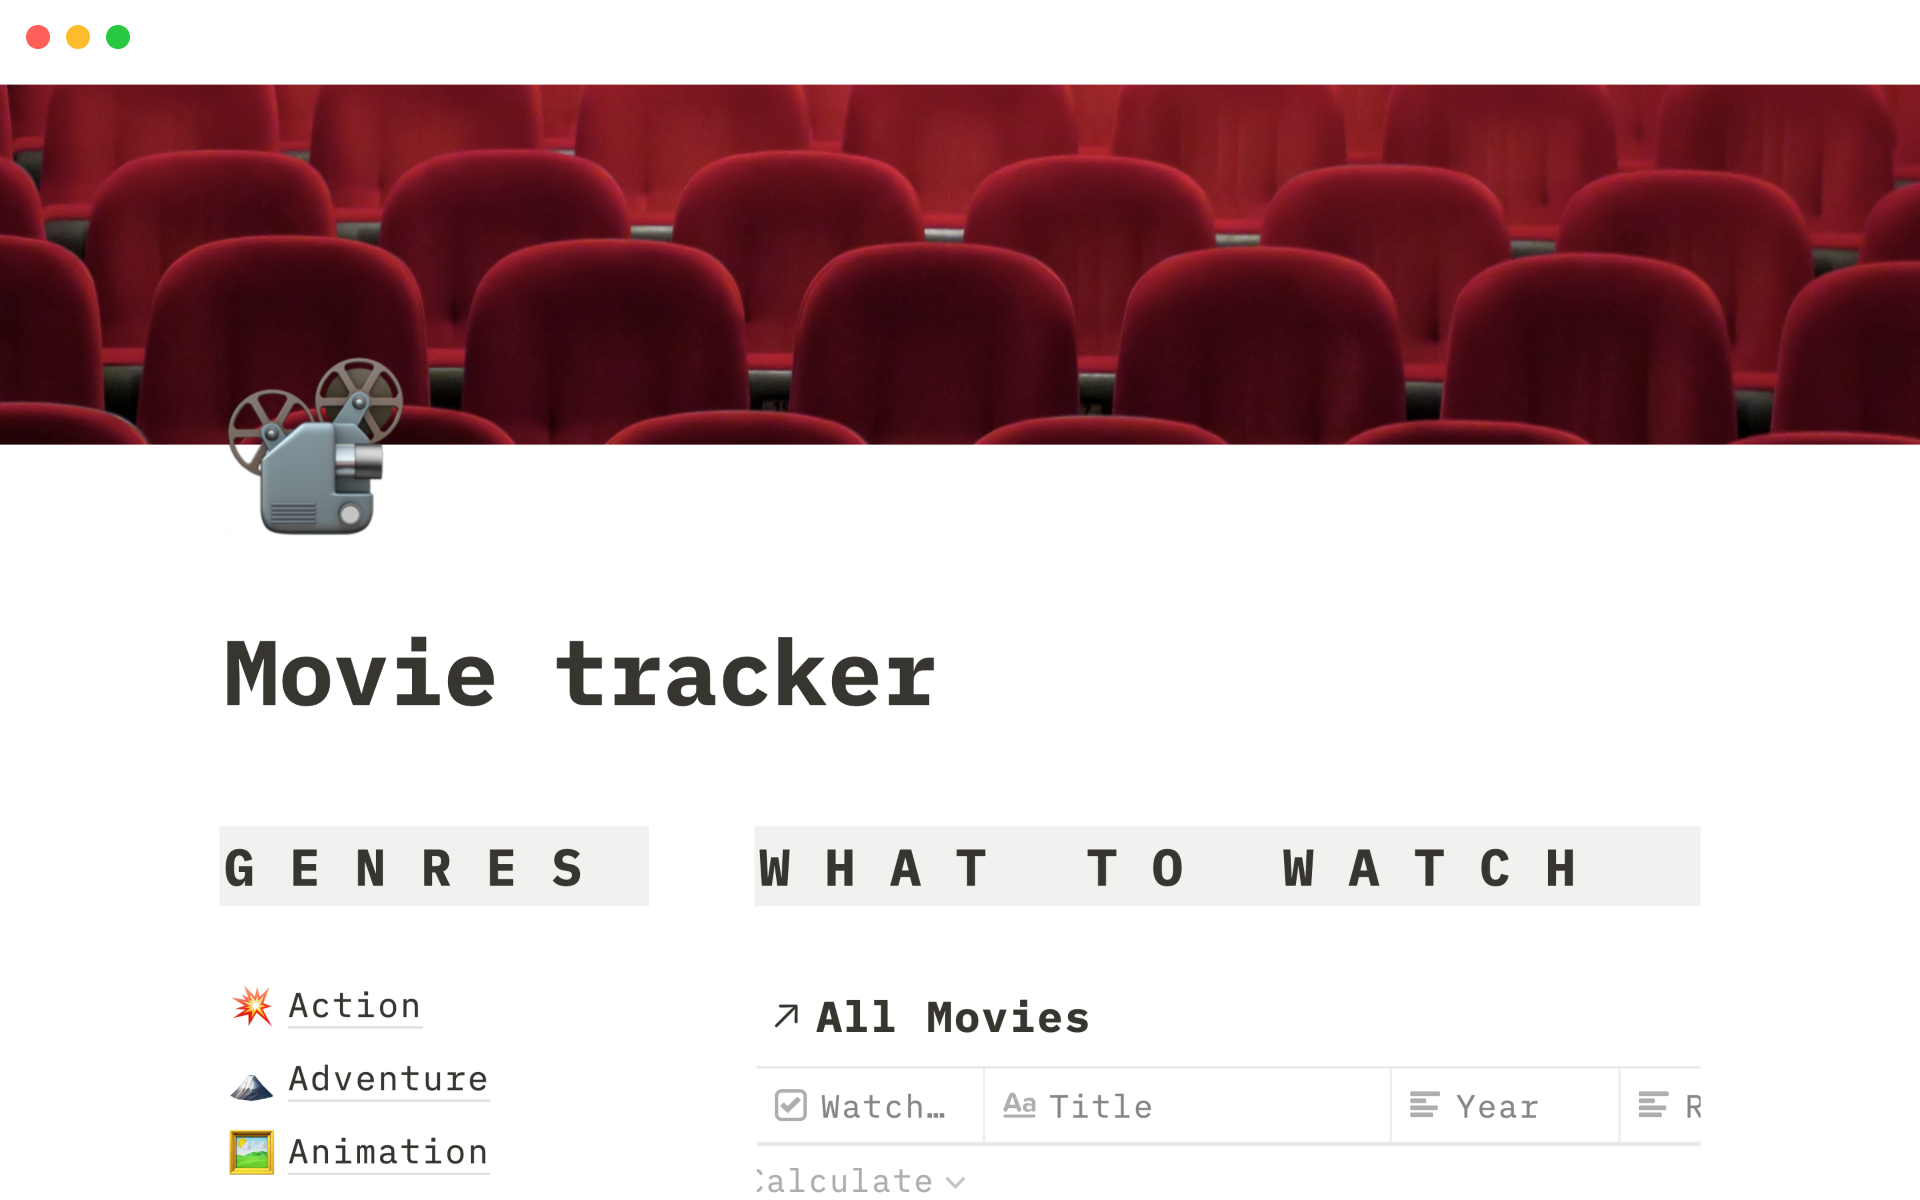 movie review template notion